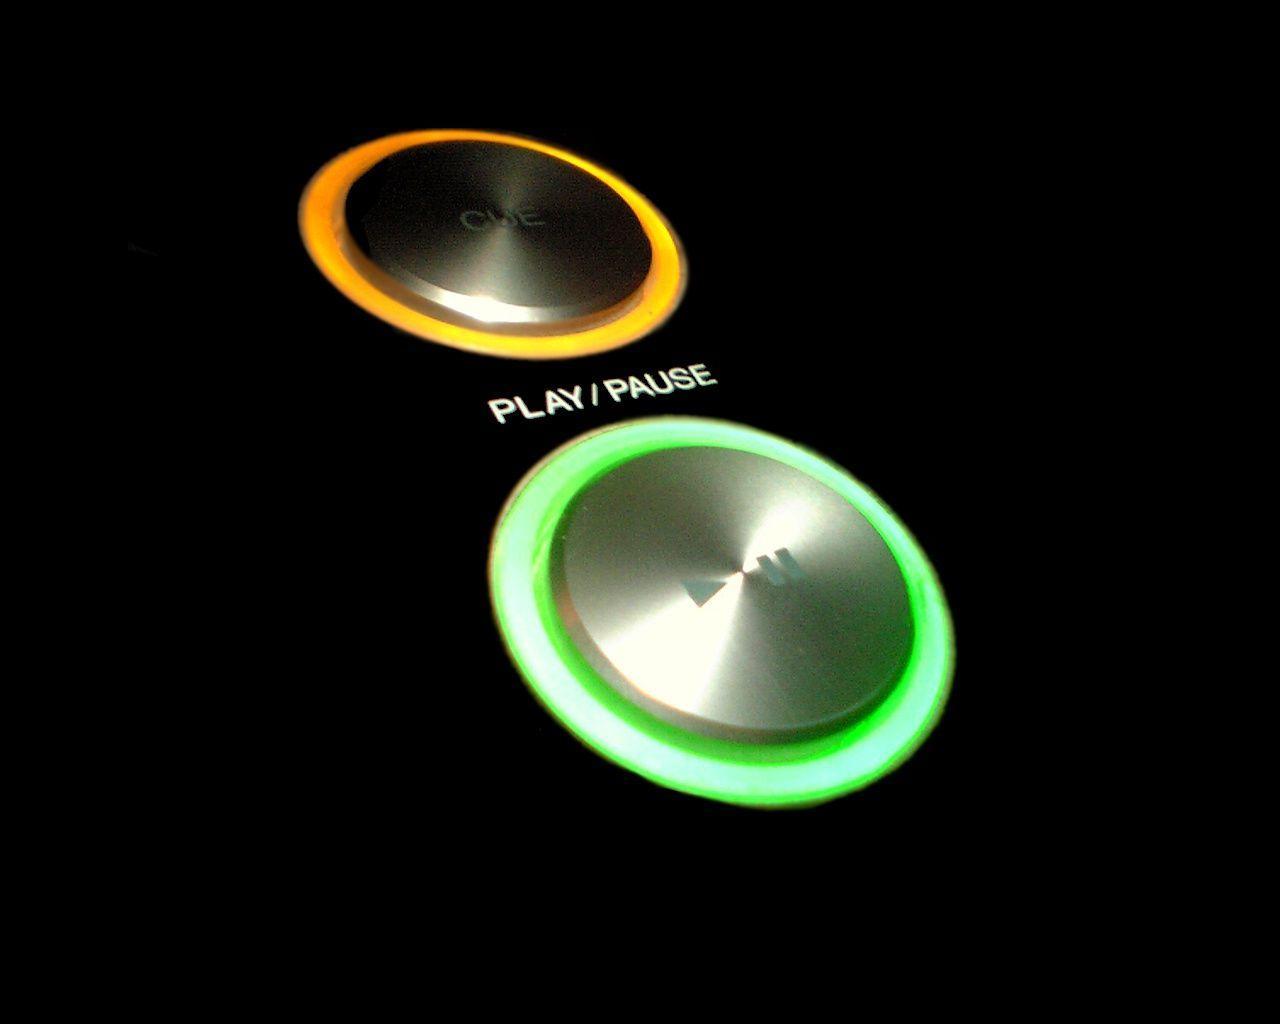 Dj power, play or pause button background in 1280x1024 resolution